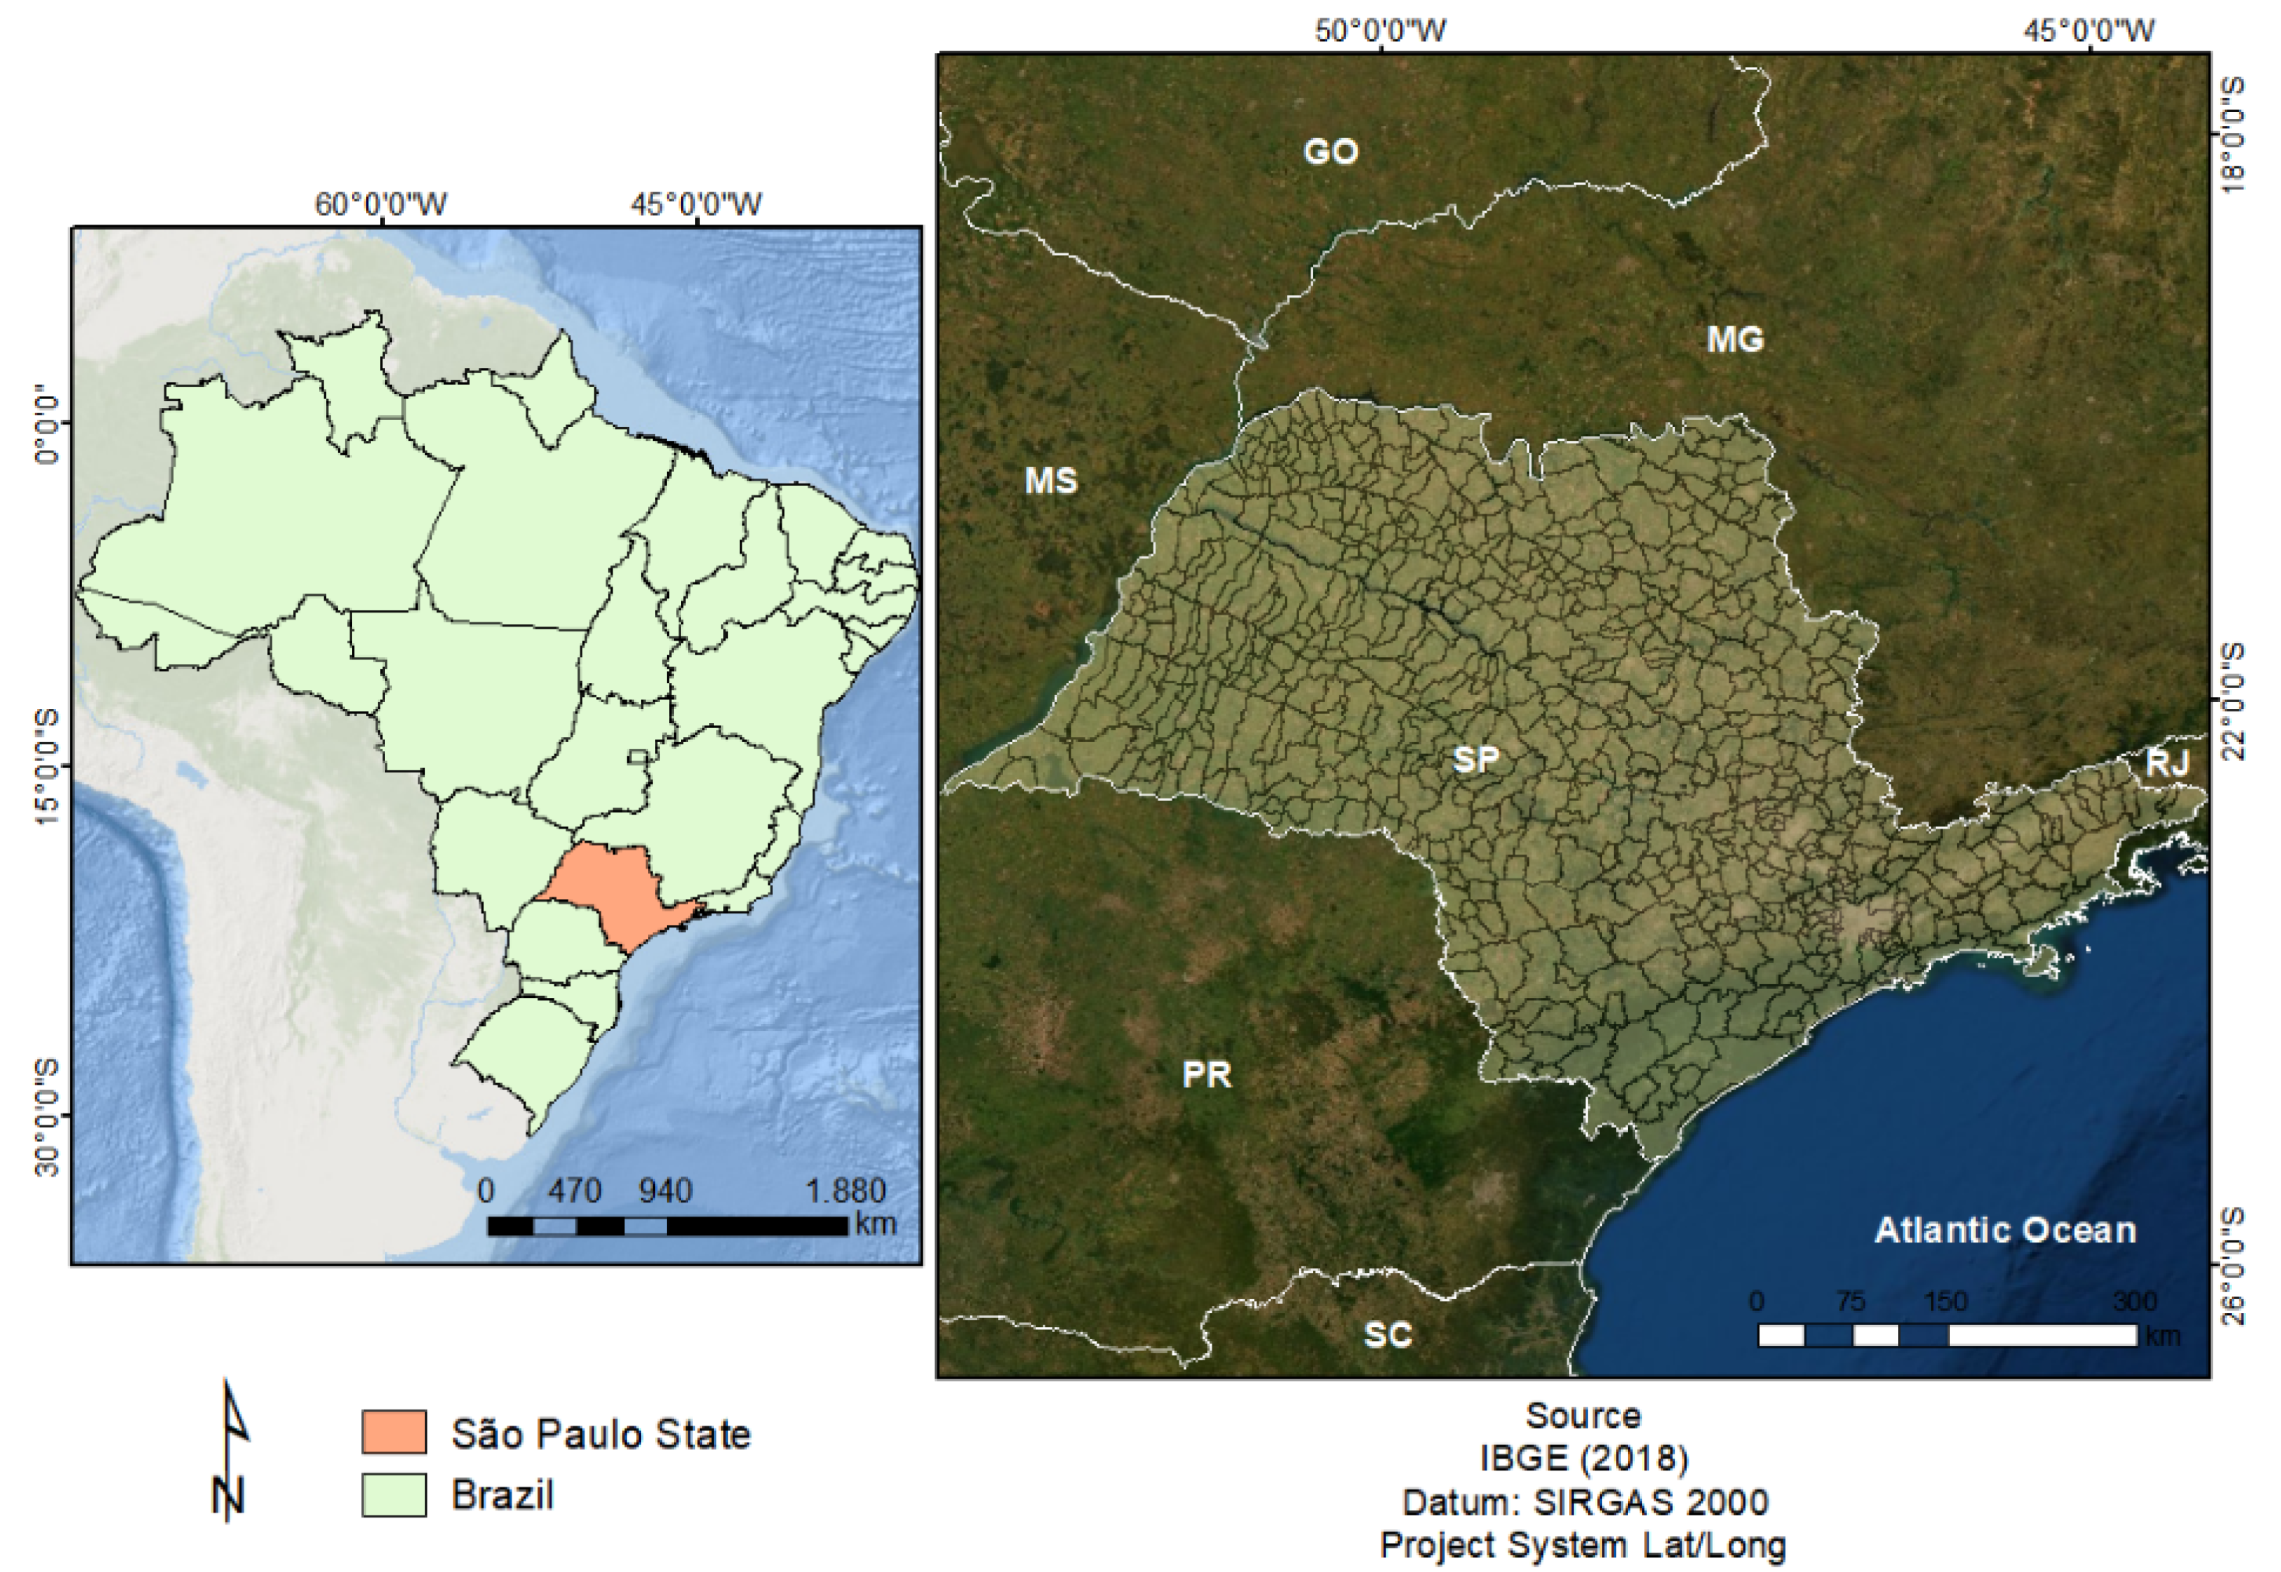 Energies | Free Full-Text | Regional Distance Routes Estimation for  Municipal Solid Waste Disposal, Case Study São Paulo State, Brazil | HTML